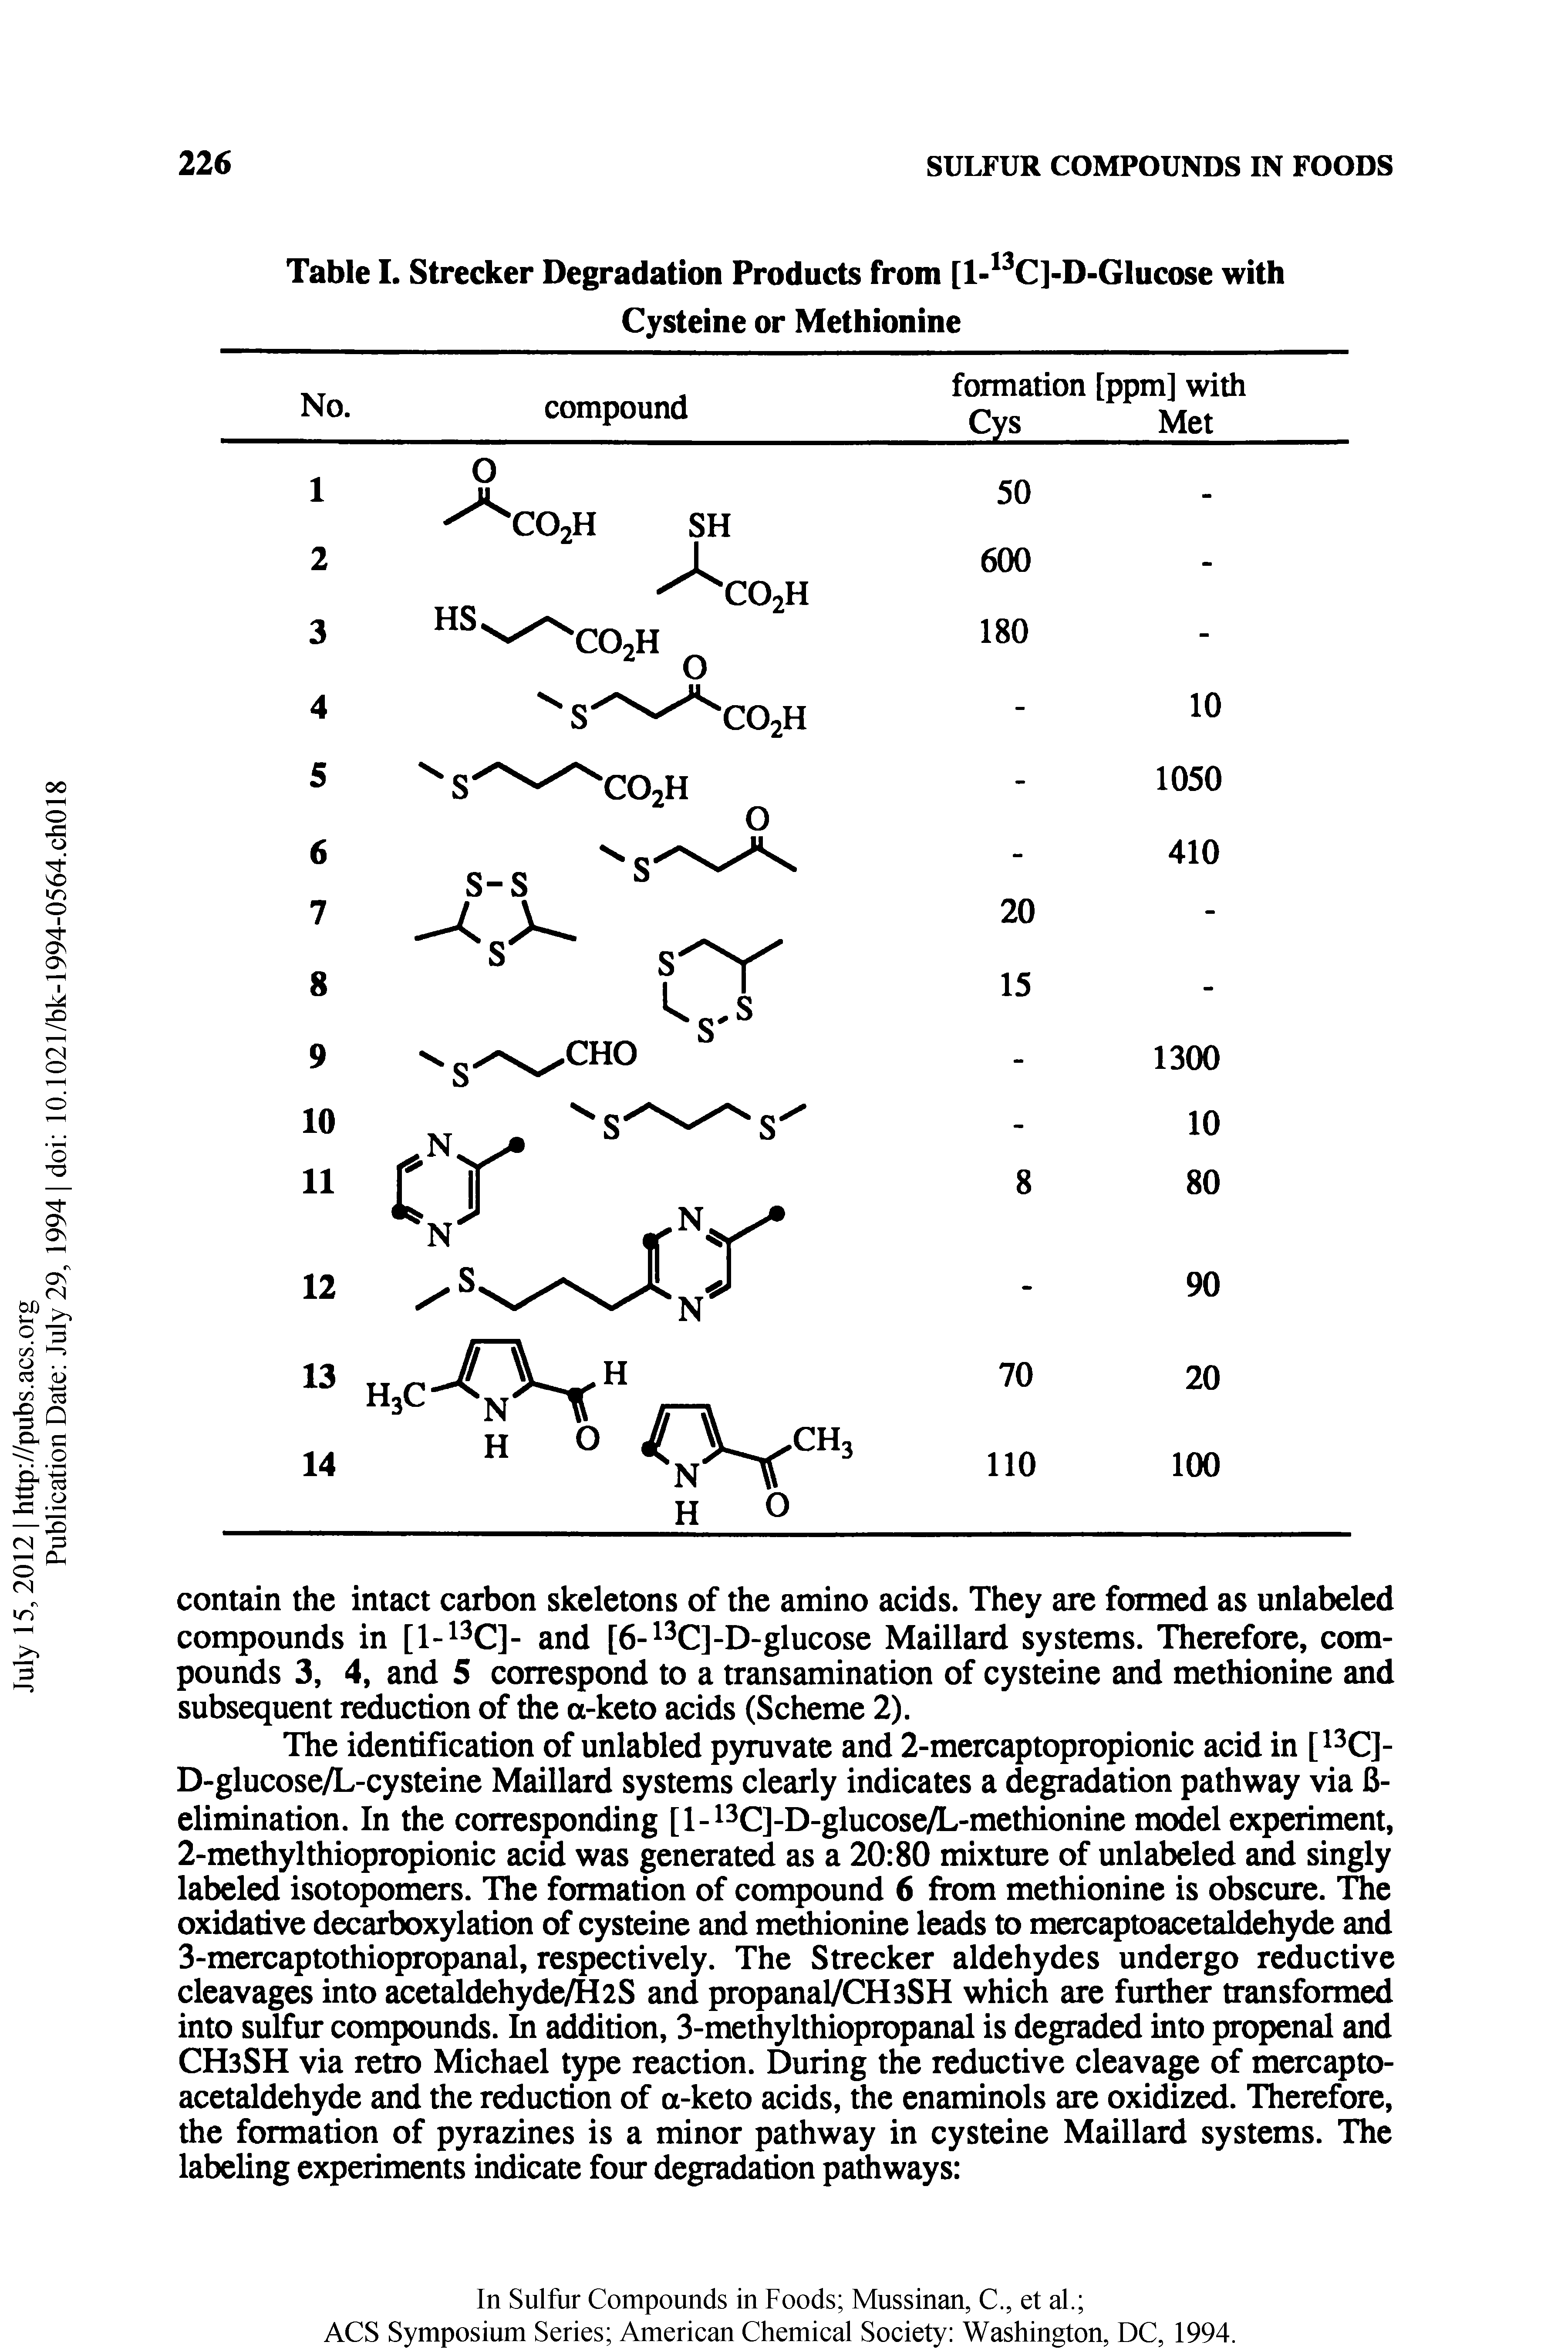 Table I. Strecker Degradation Products from [l- C]-D-Glucose with Cysteine or Methionine...